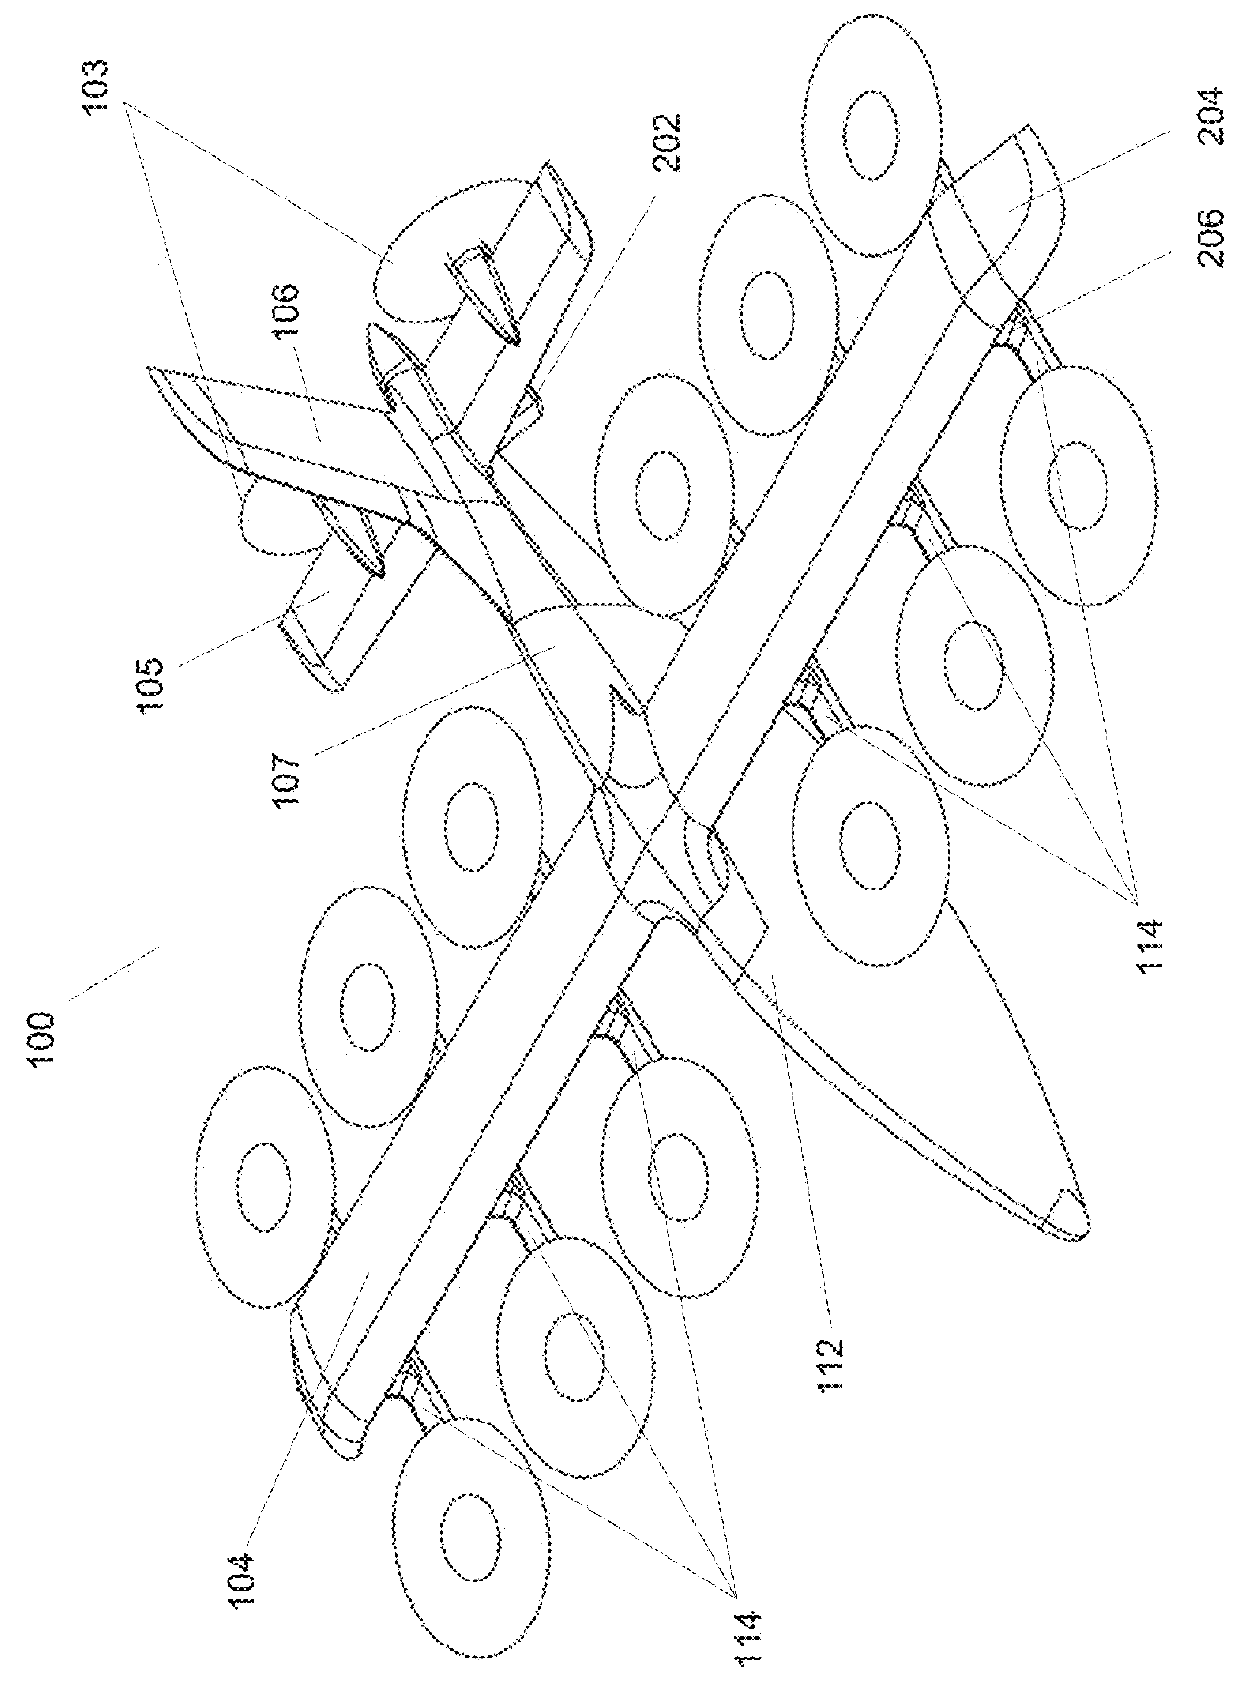 Ventilated rotor mounting boom for personal aircraft